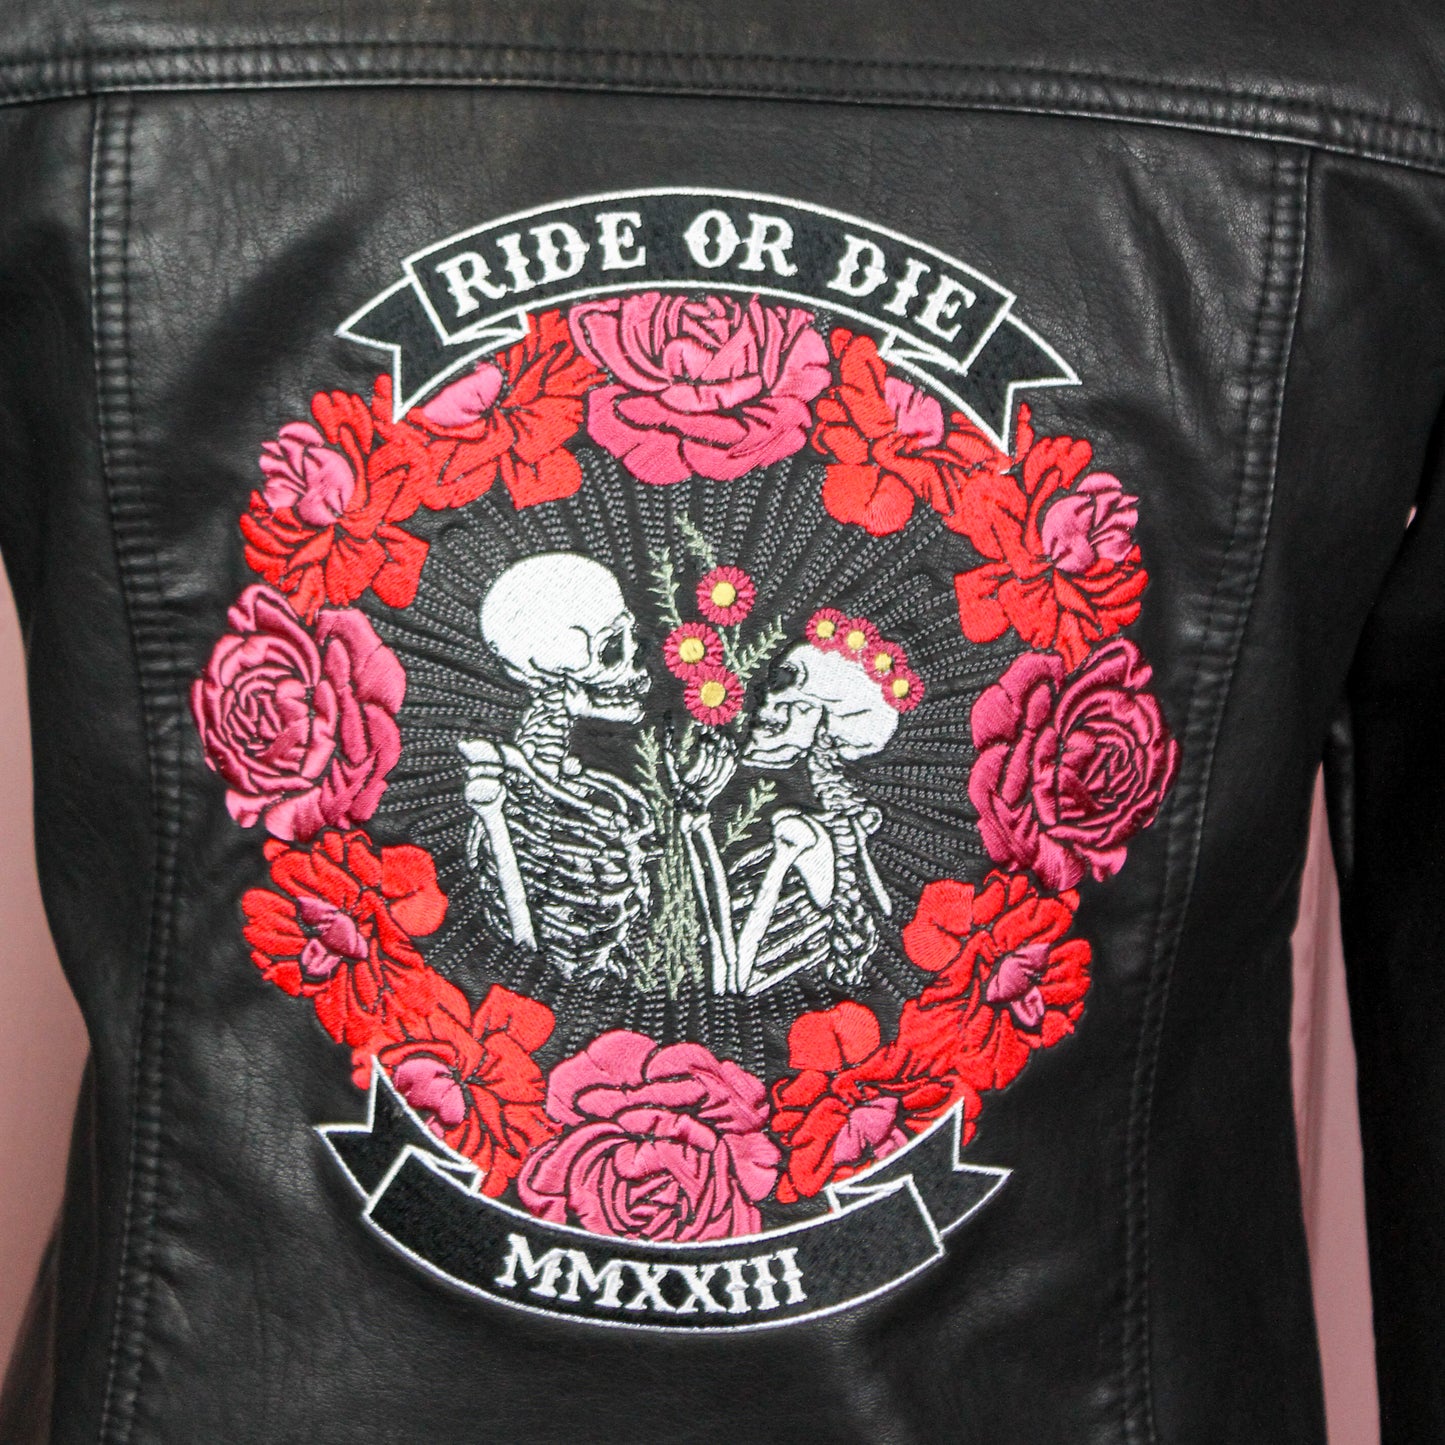 Elegant Ride Or Die Floral Skeleton Couple Black Leather Bridal Jacket – a timeless and daring cover-up for the modern and bold bride